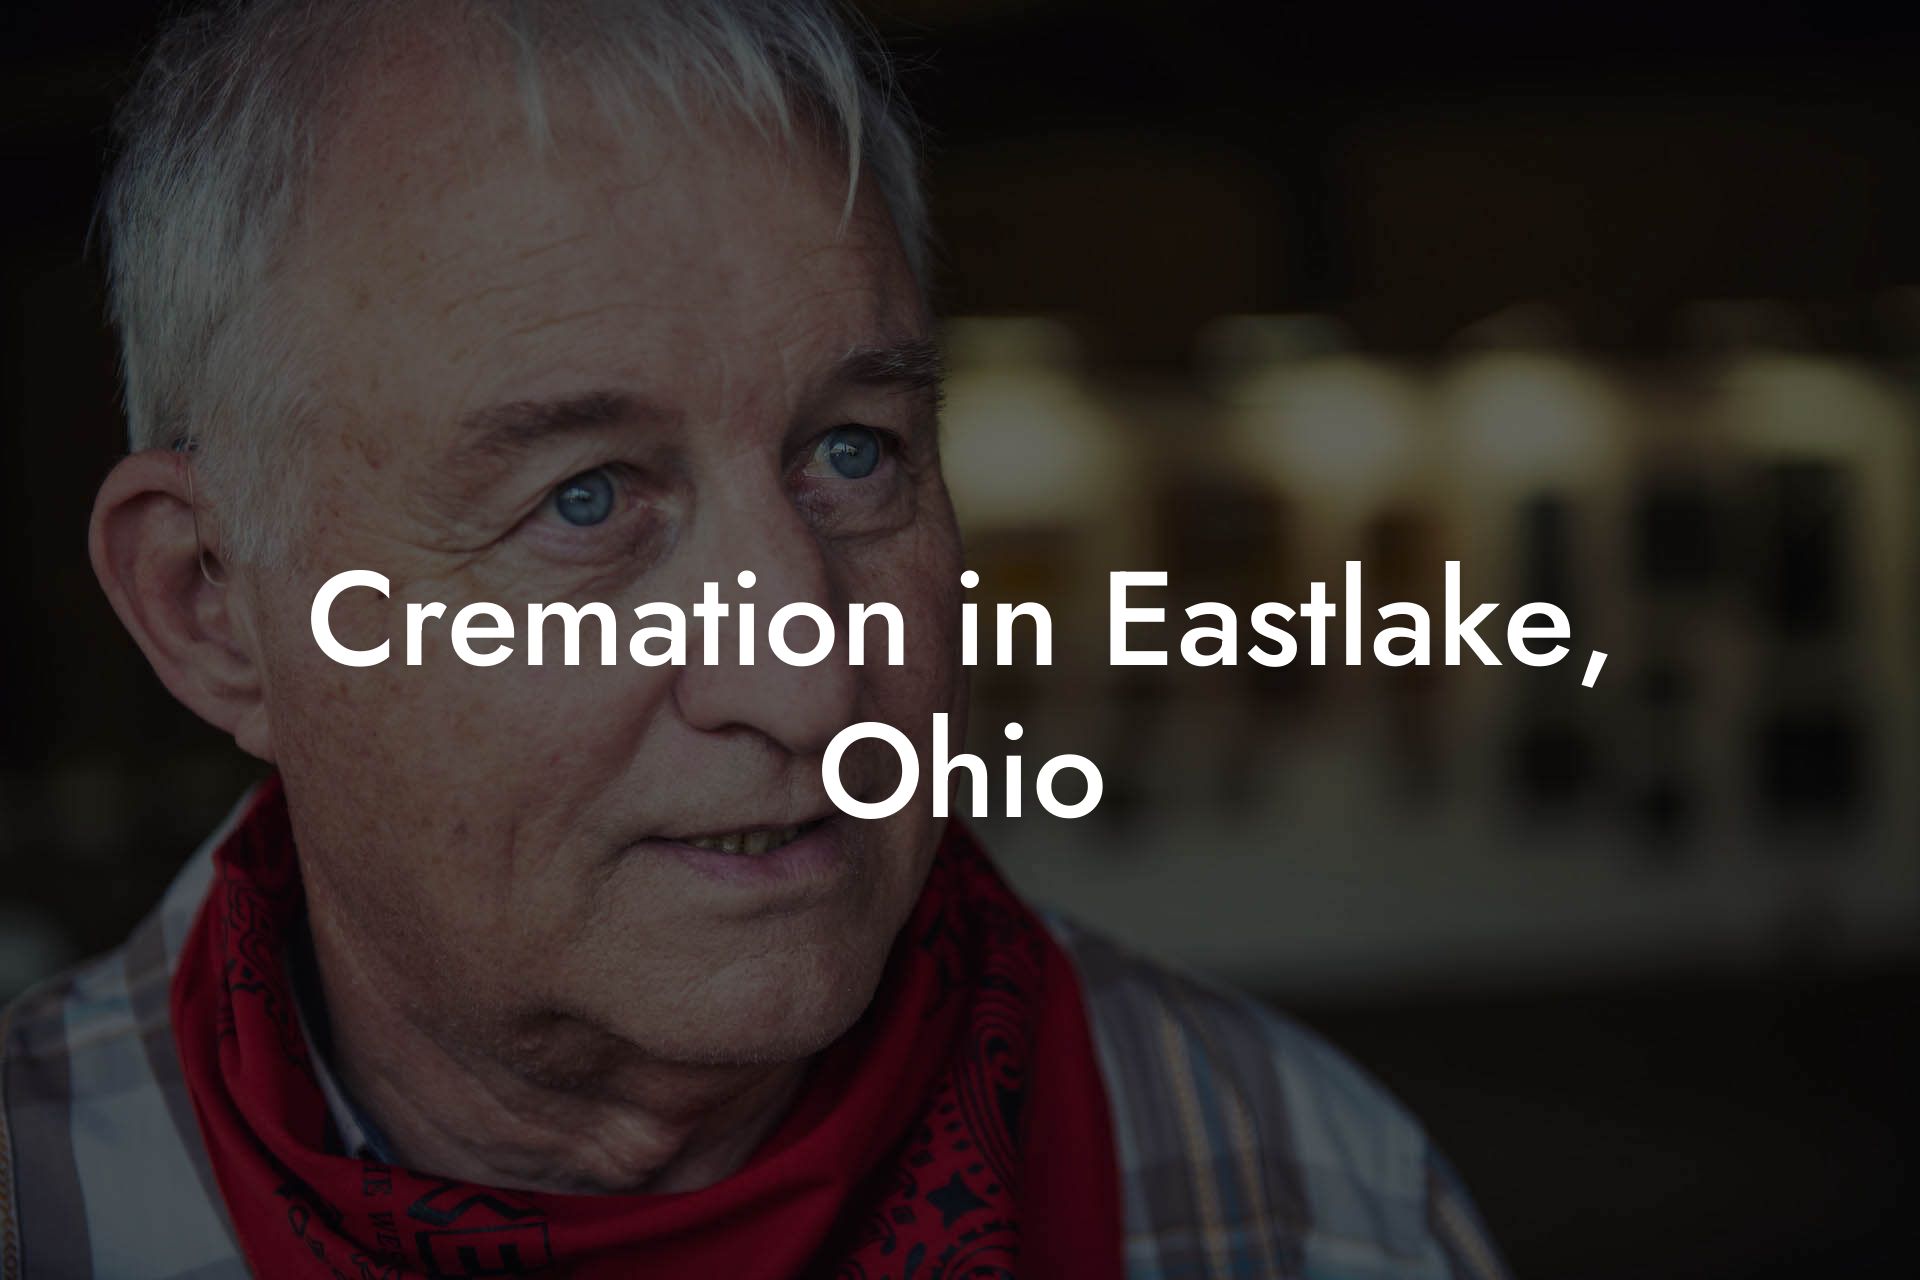 Cremation in Eastlake, Ohio